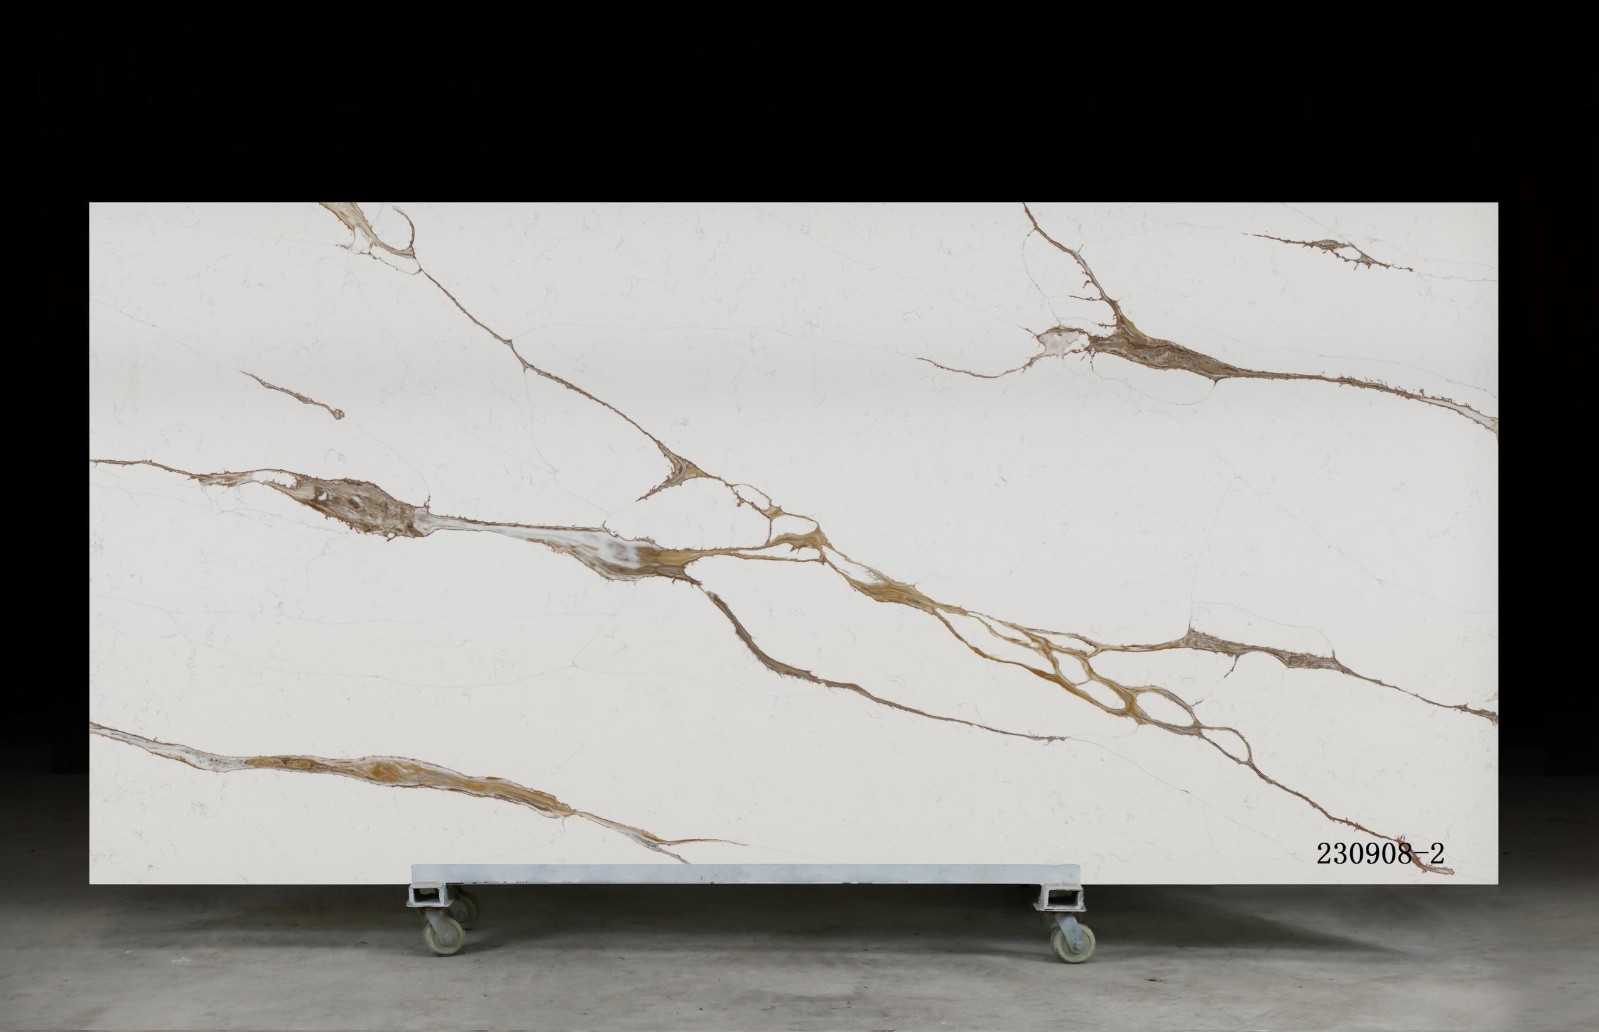 artificial marble slab